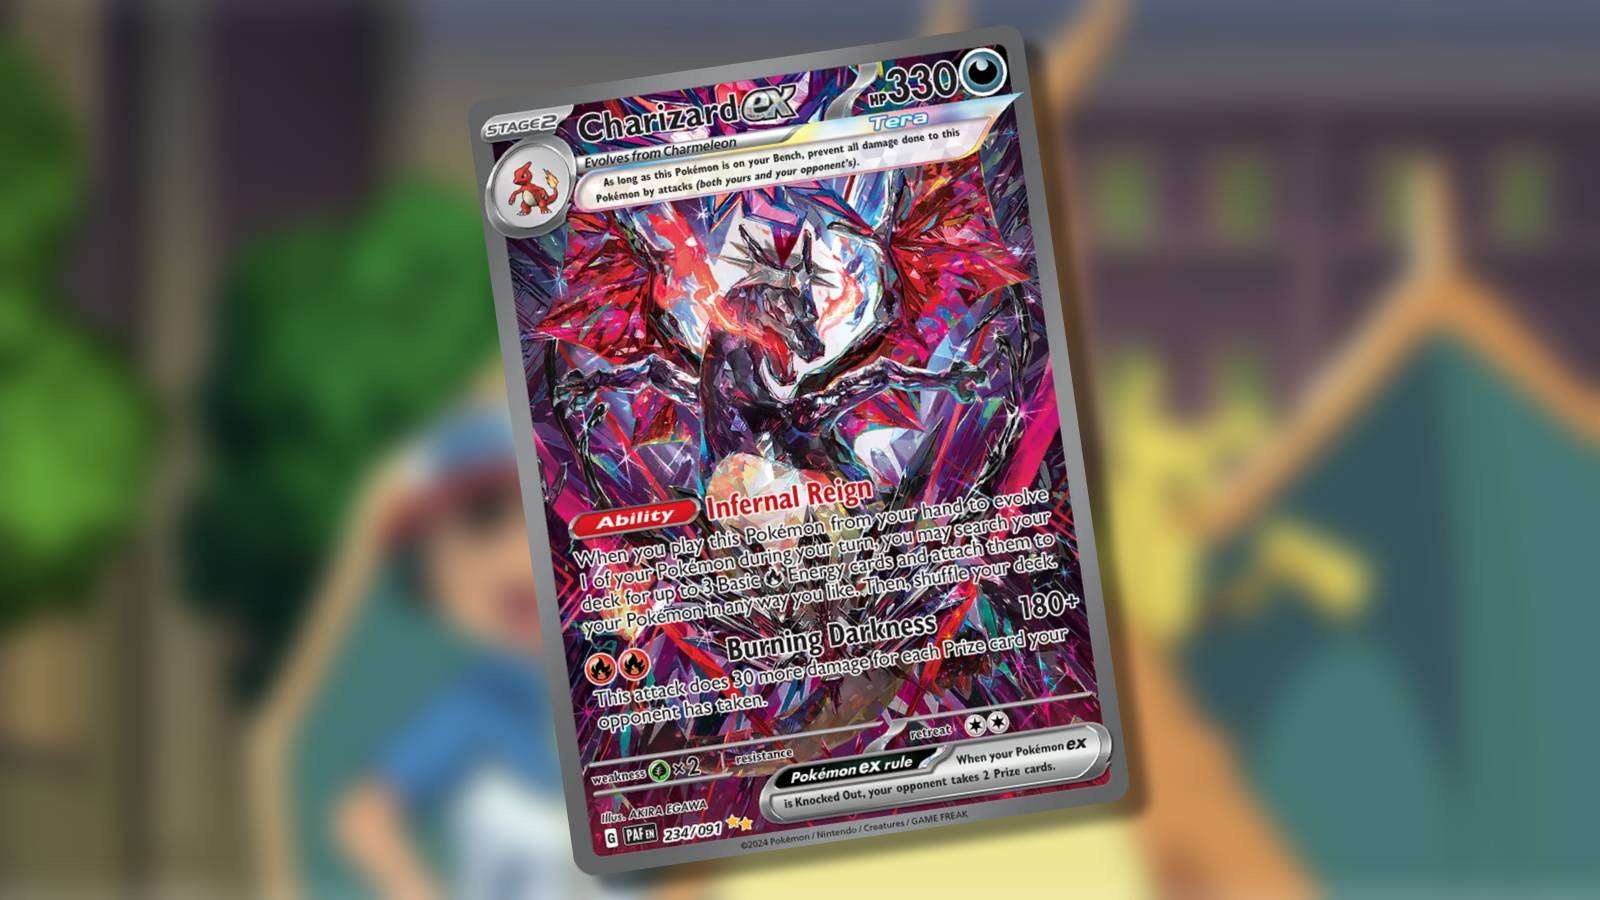 The Pokemon TCG Paldean Fates Full Illustrated Rare Shiny Charizard is visible against a blurred background